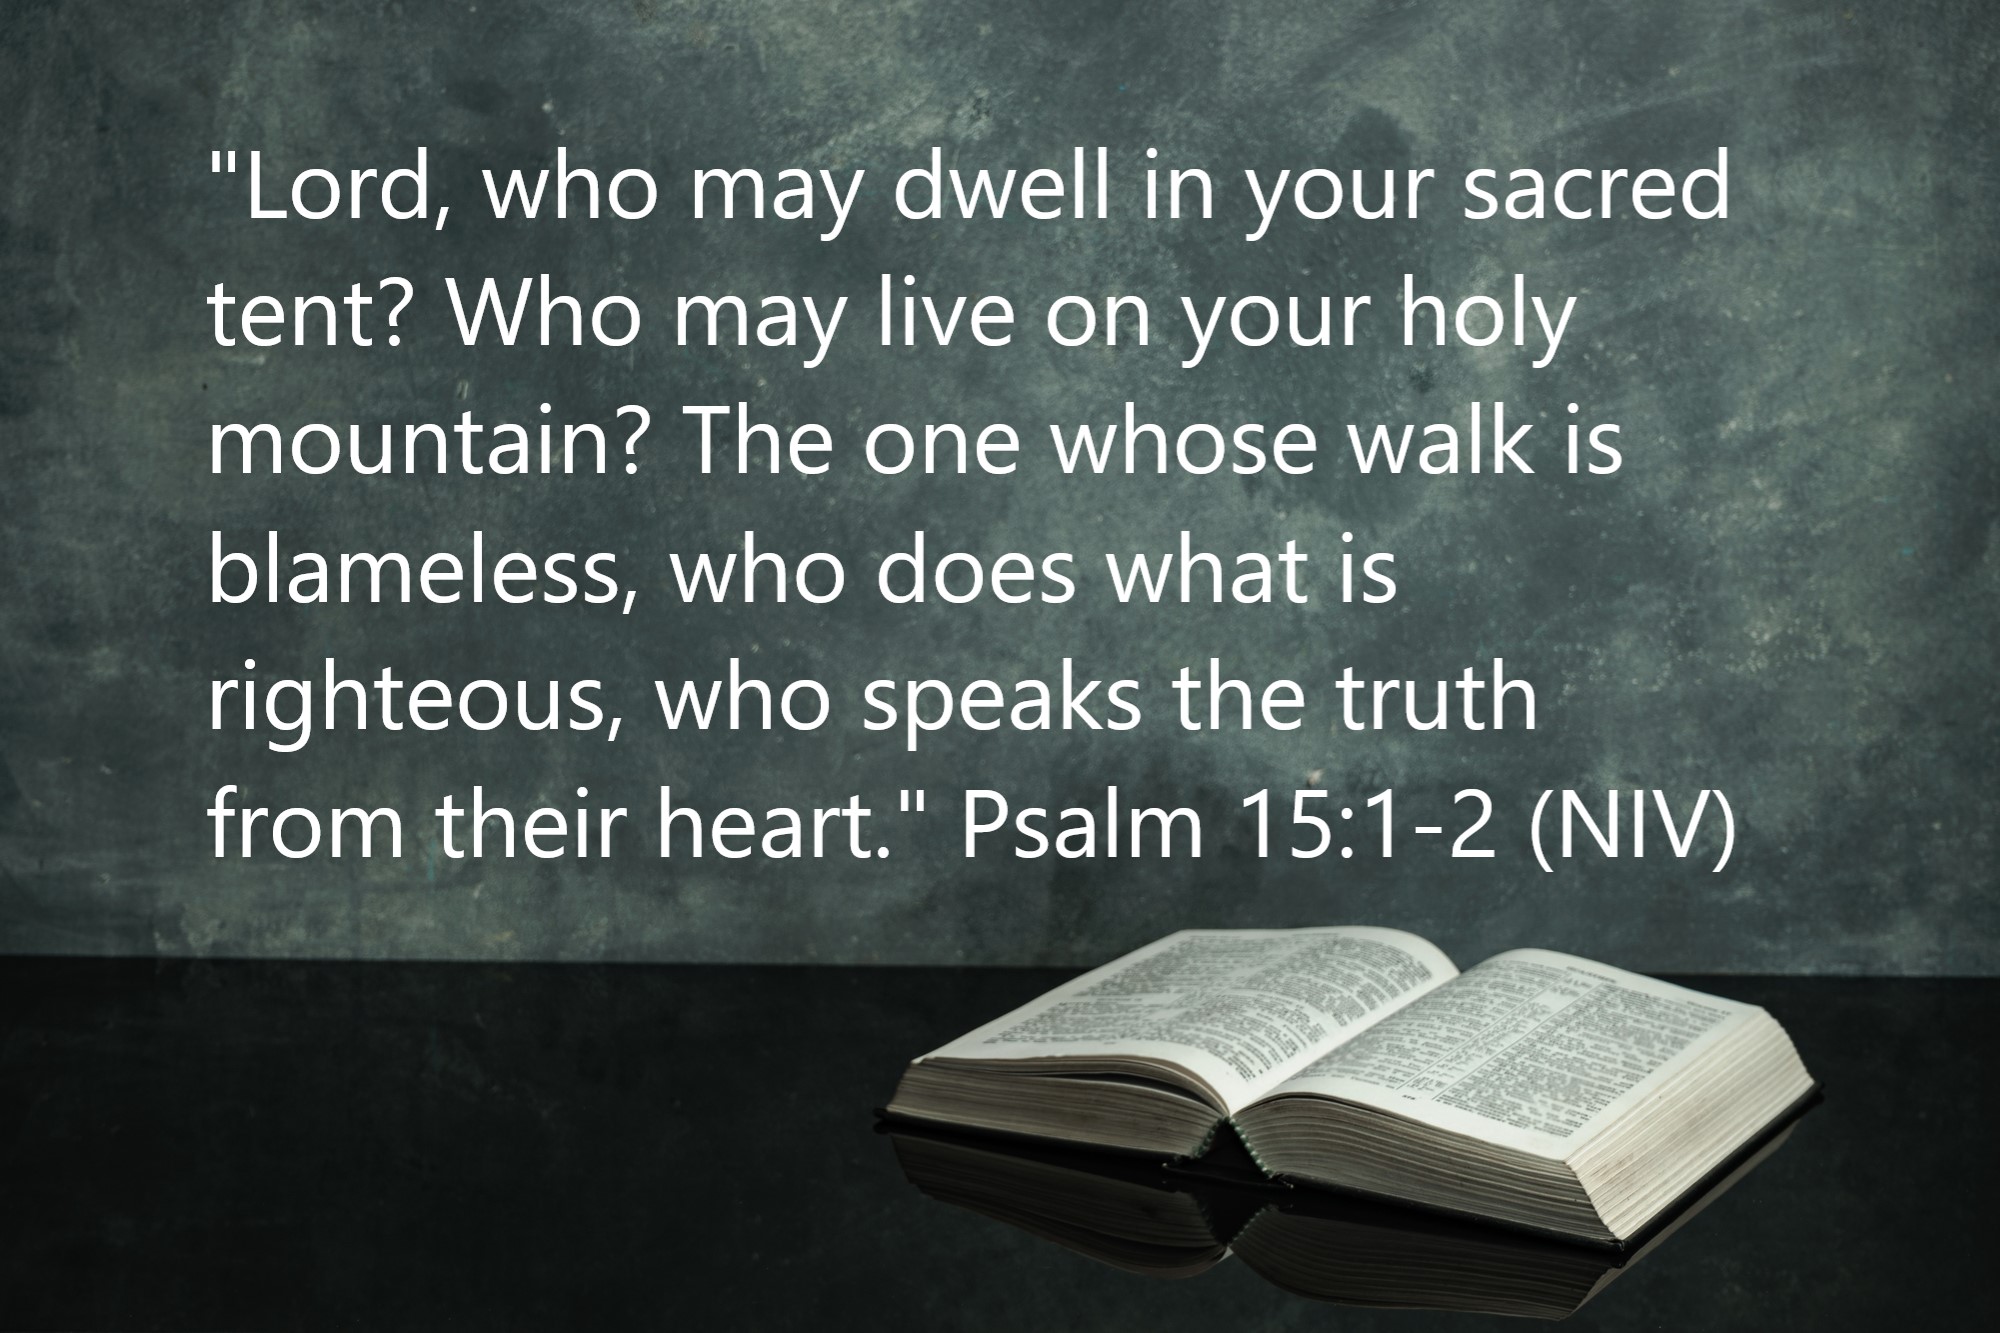 Psalm 15:1-2 (NIV): "Lord, who may dwell in your sacred tent? Who may live on your holy mountain? The one whose walk is blameless, who does what is righteous, who speaks the truth from their heart." 